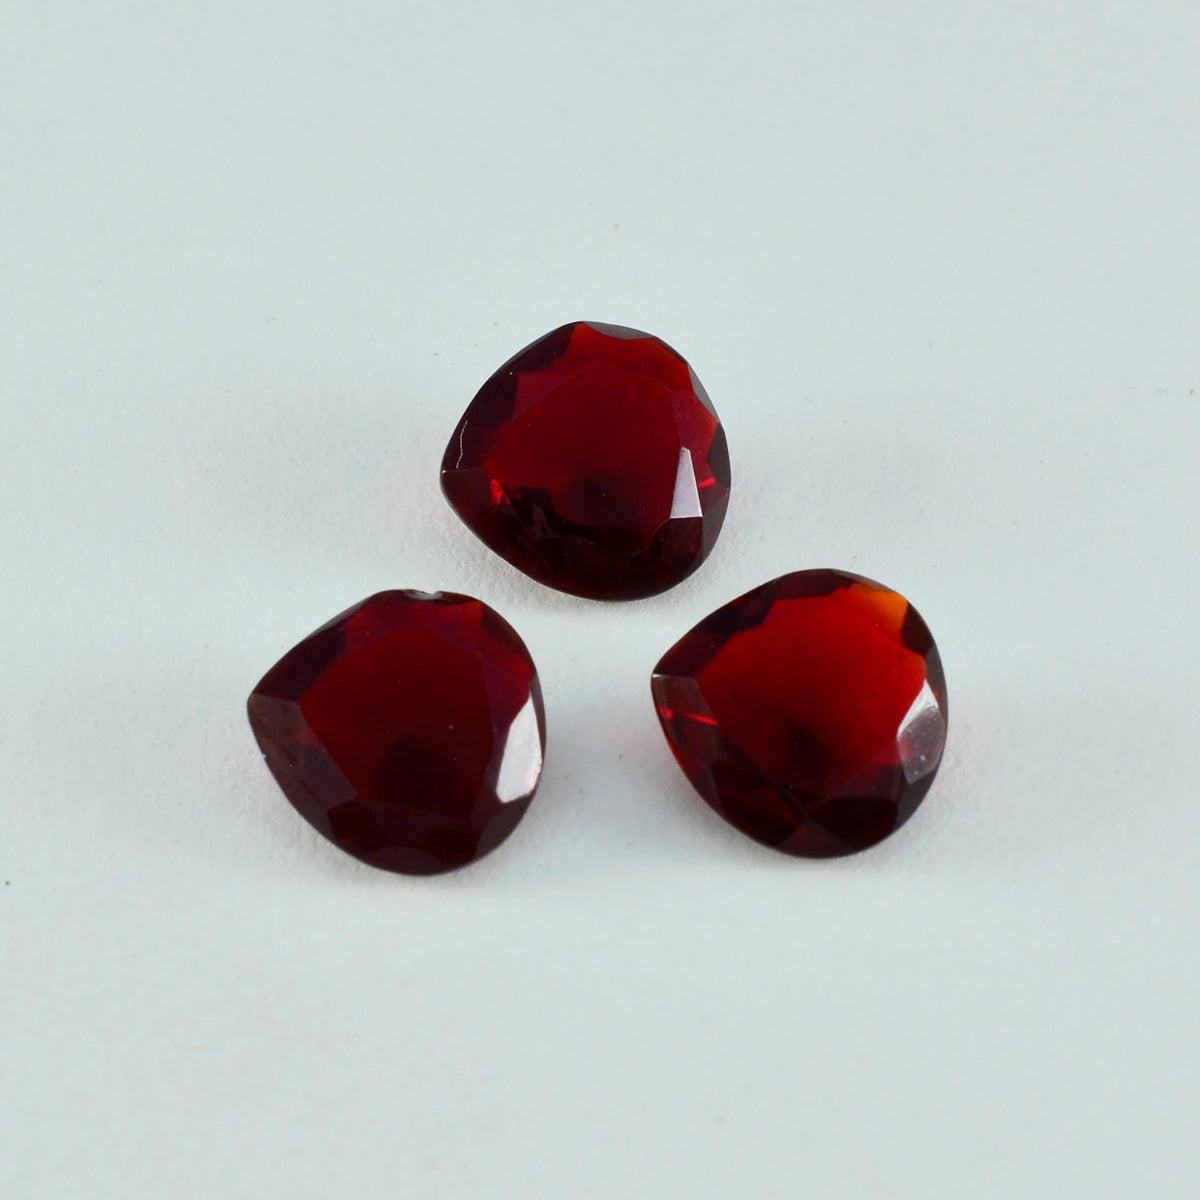 Riyogems 1PC Red Ruby CZ Faceted 15x15 mm Heart Shape AAA Quality Gemstone